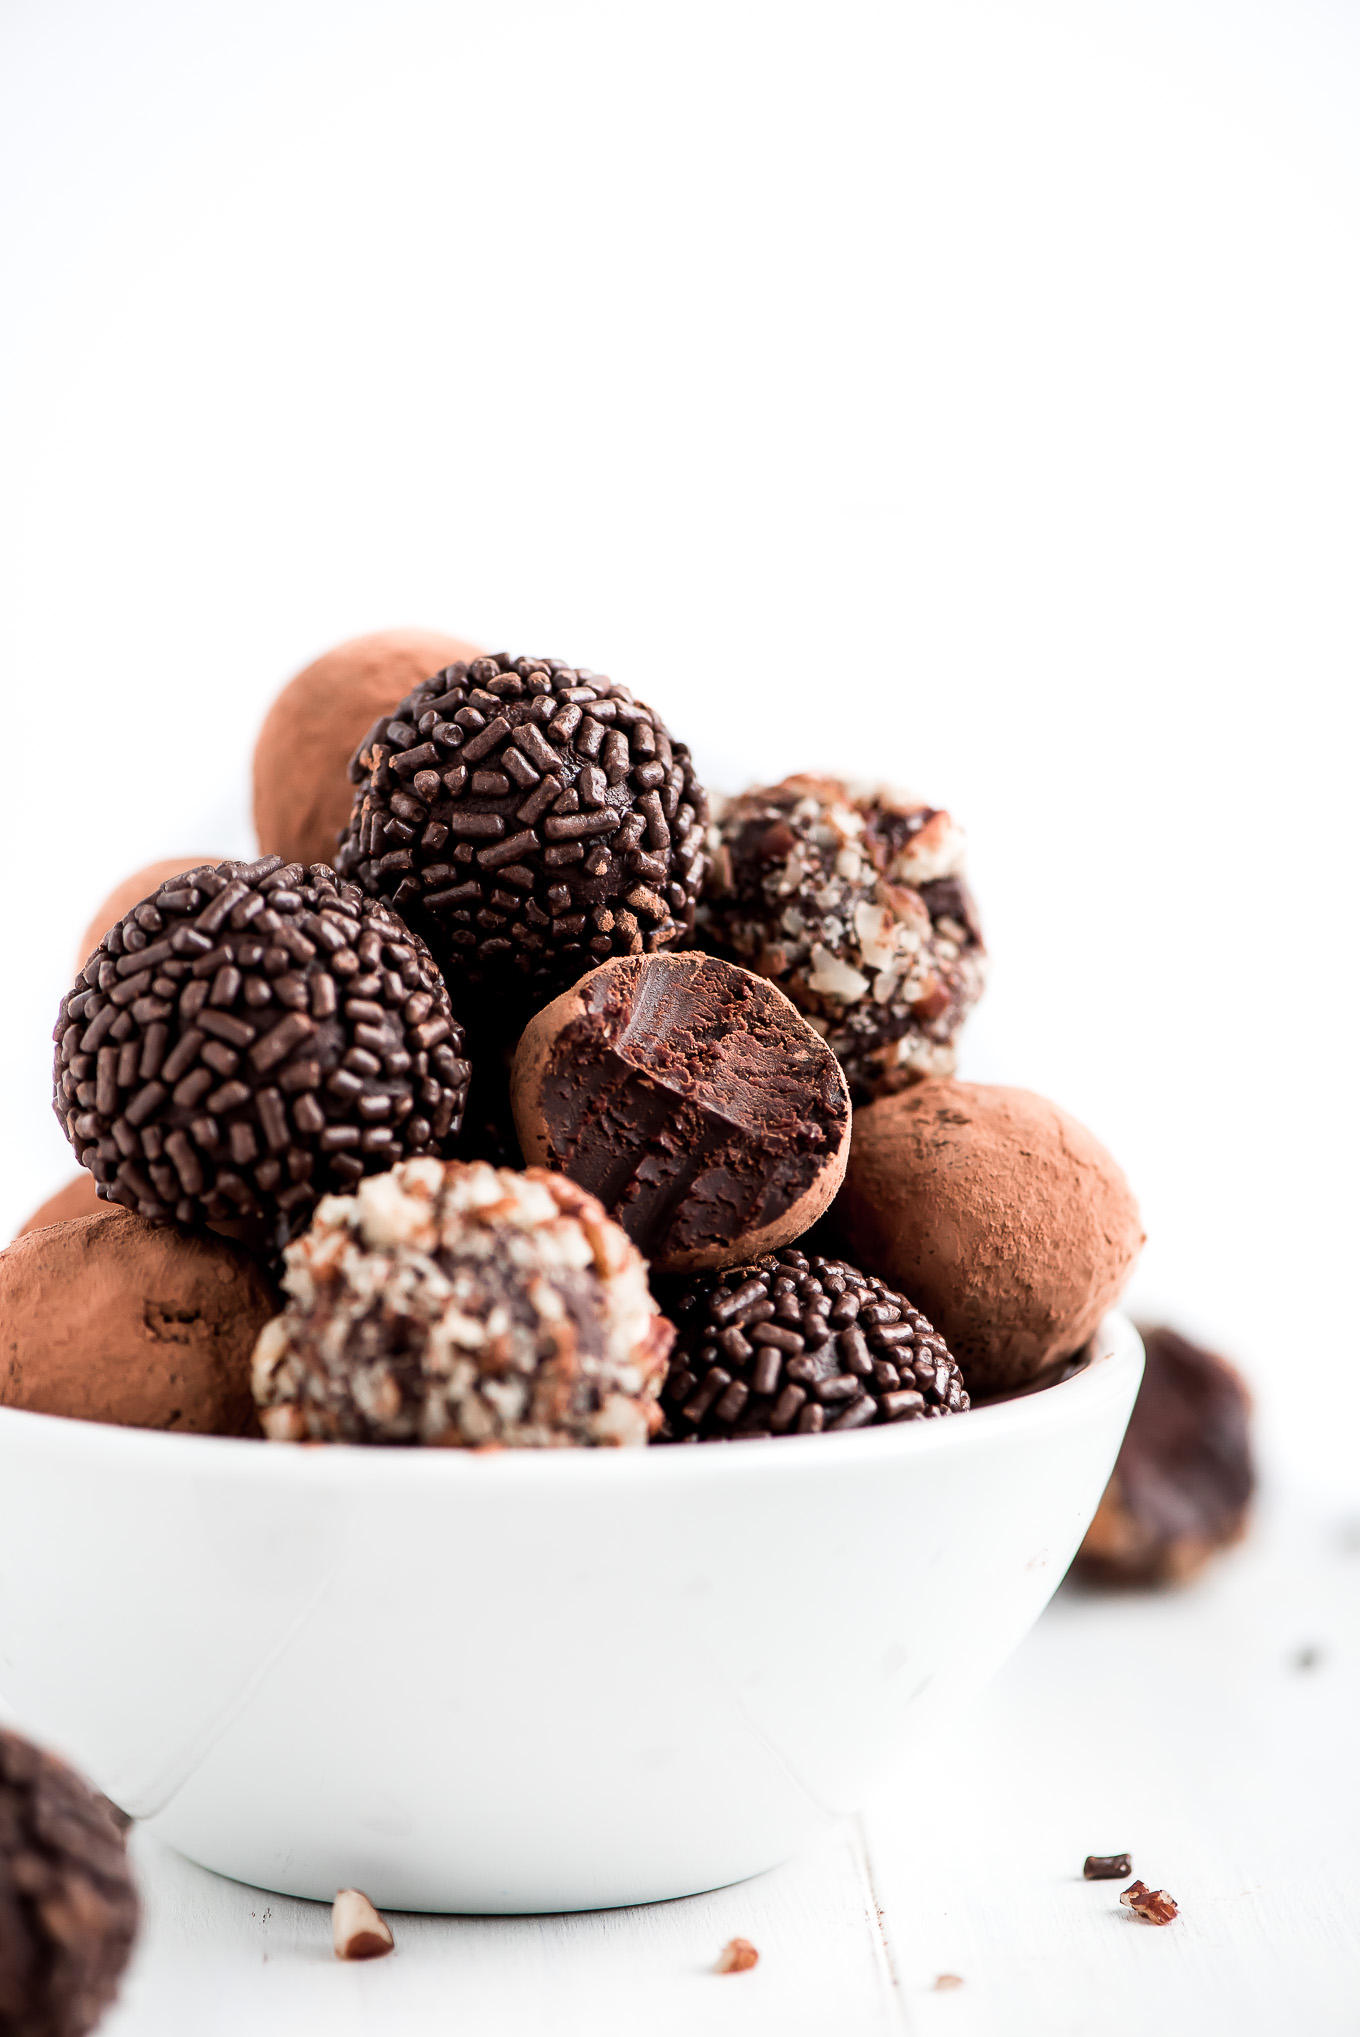 Bowl of 4-Ingredient Chocolate Truffles. Rolled in chocolate sprinkles, pecans, or cocoa powder.